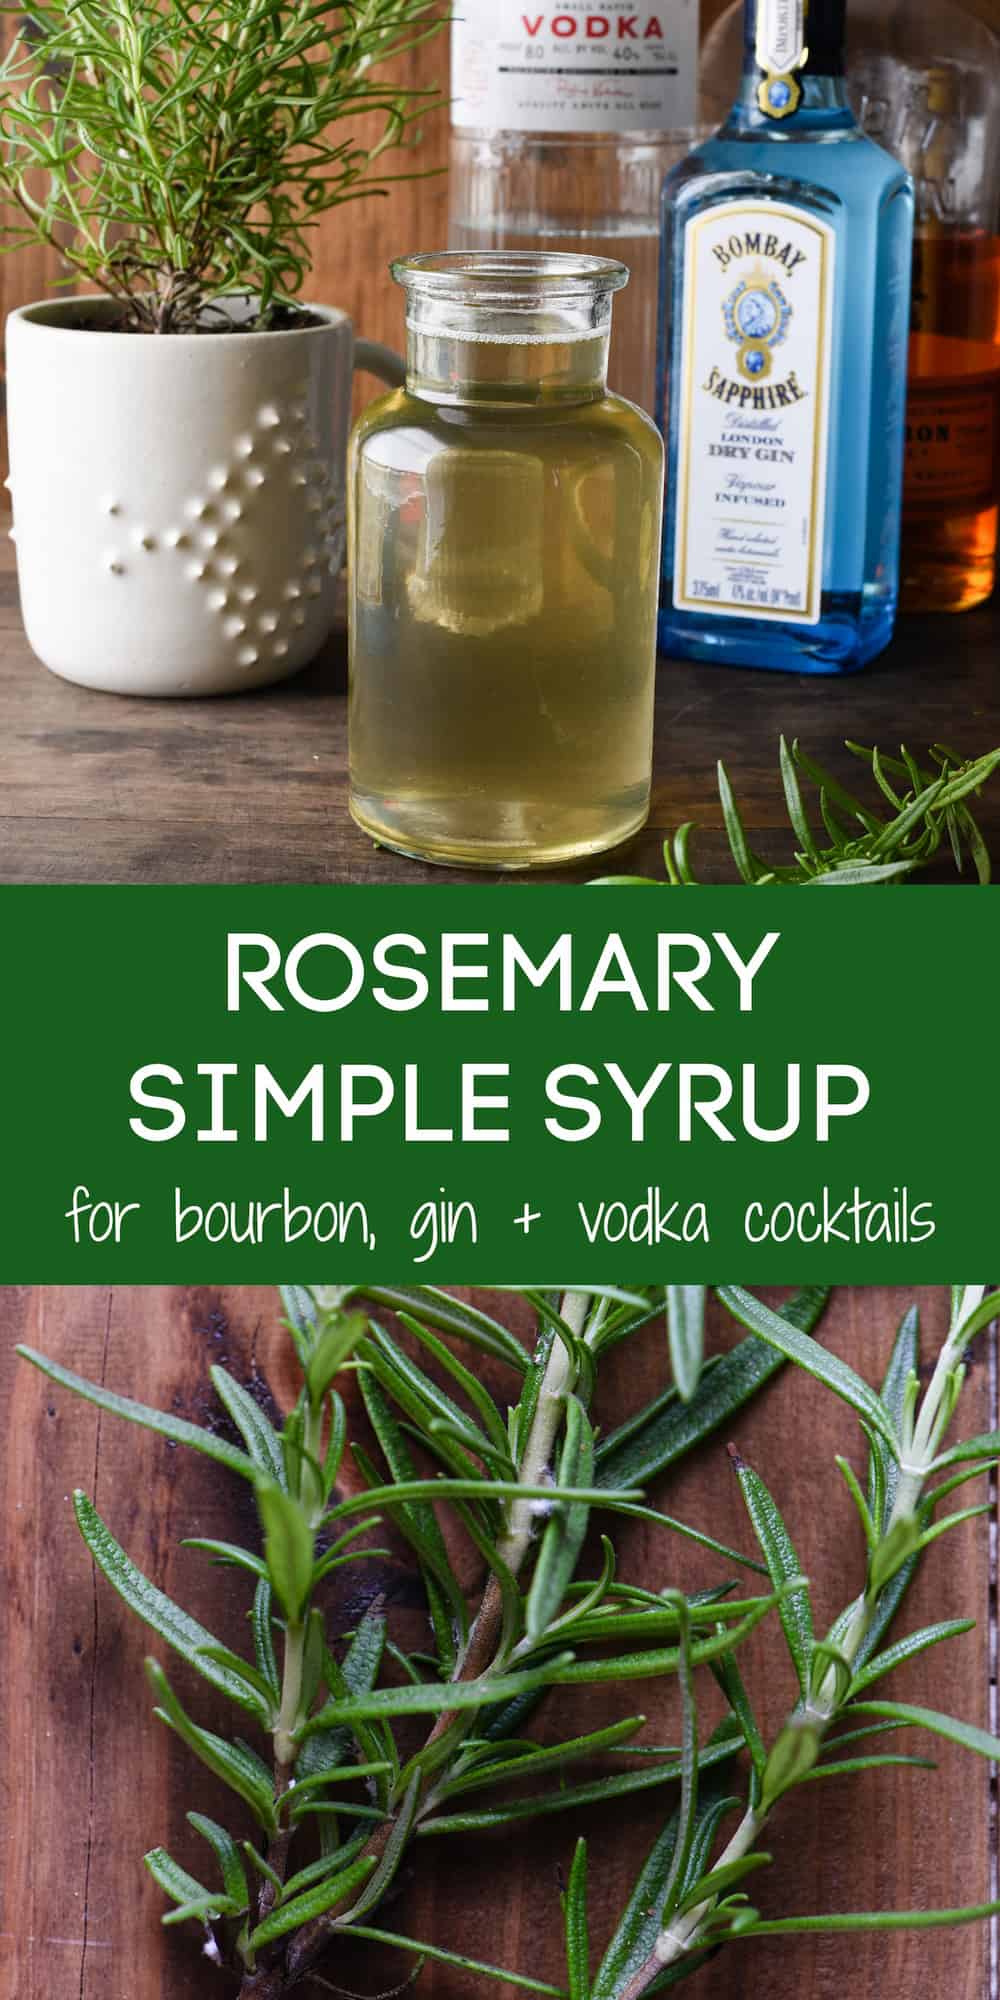 Collage of images of fresh rosemary and rosemary simple syrup with overlay: ROSEMARY SIMPLE SYRUP for bourbon, gin + vodka cocktails